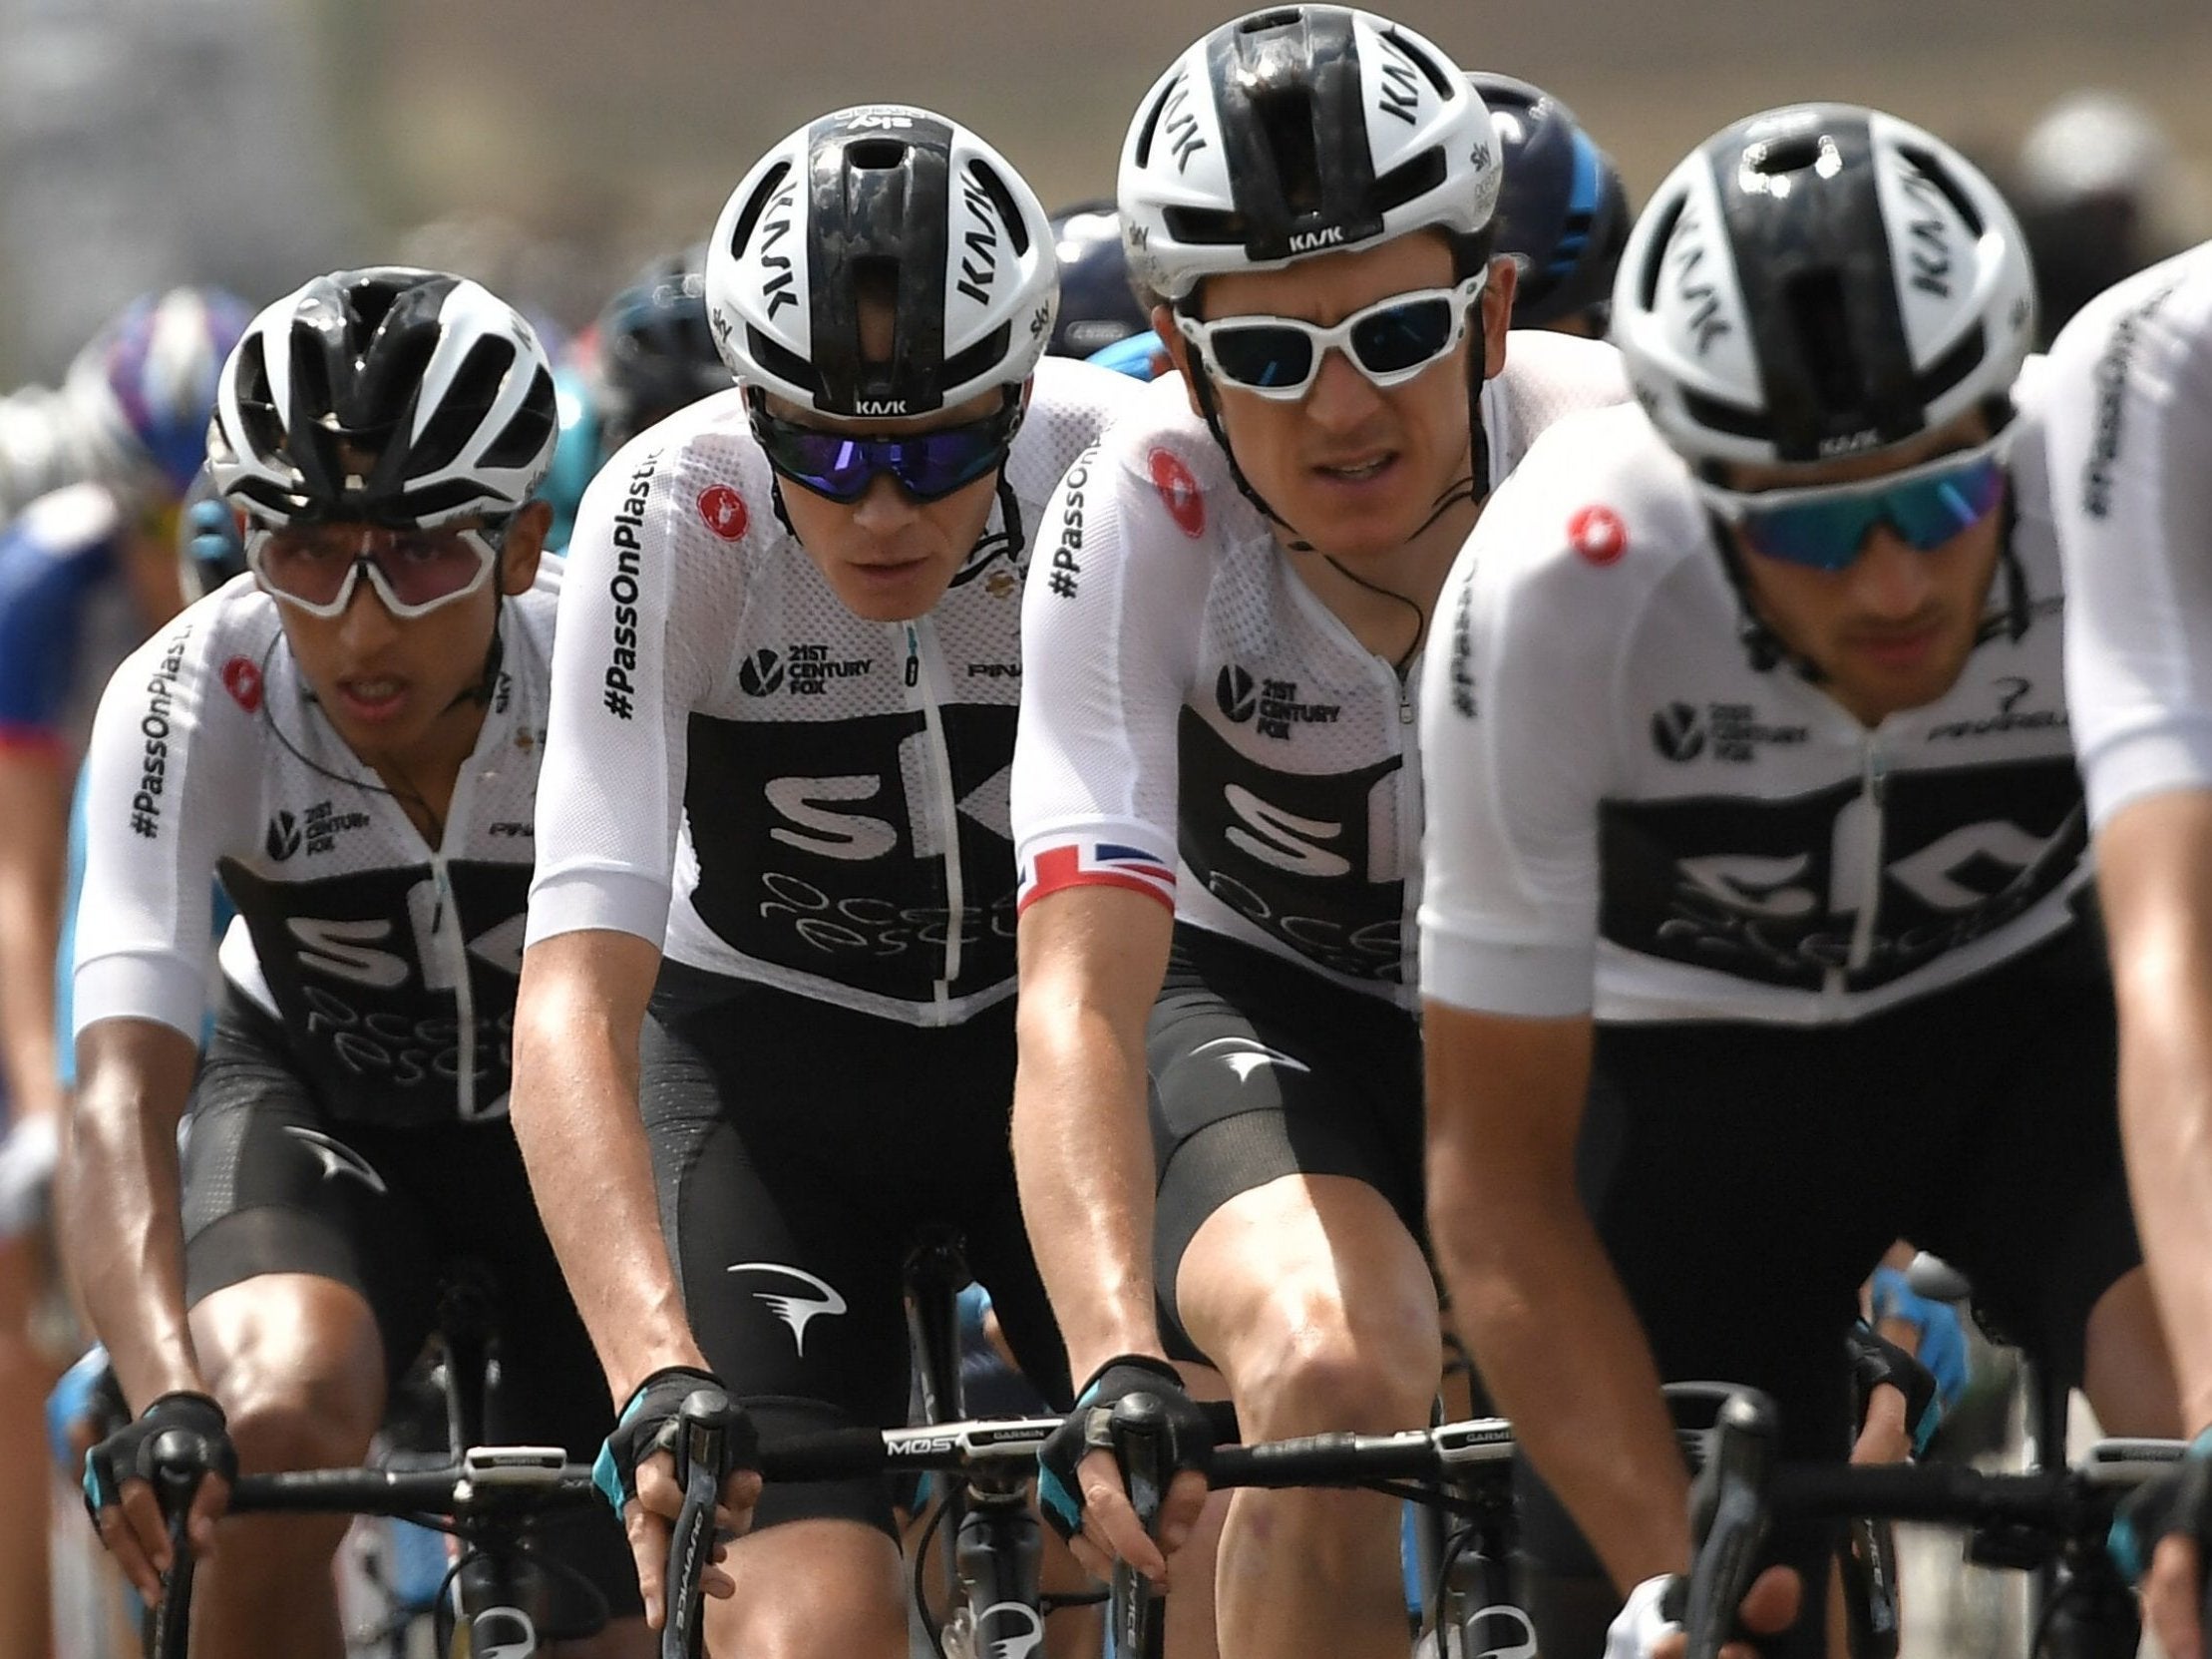 Team Sky to become Team Ineos before Giro d'Italia and Tour de France after Britain's richest man steps in